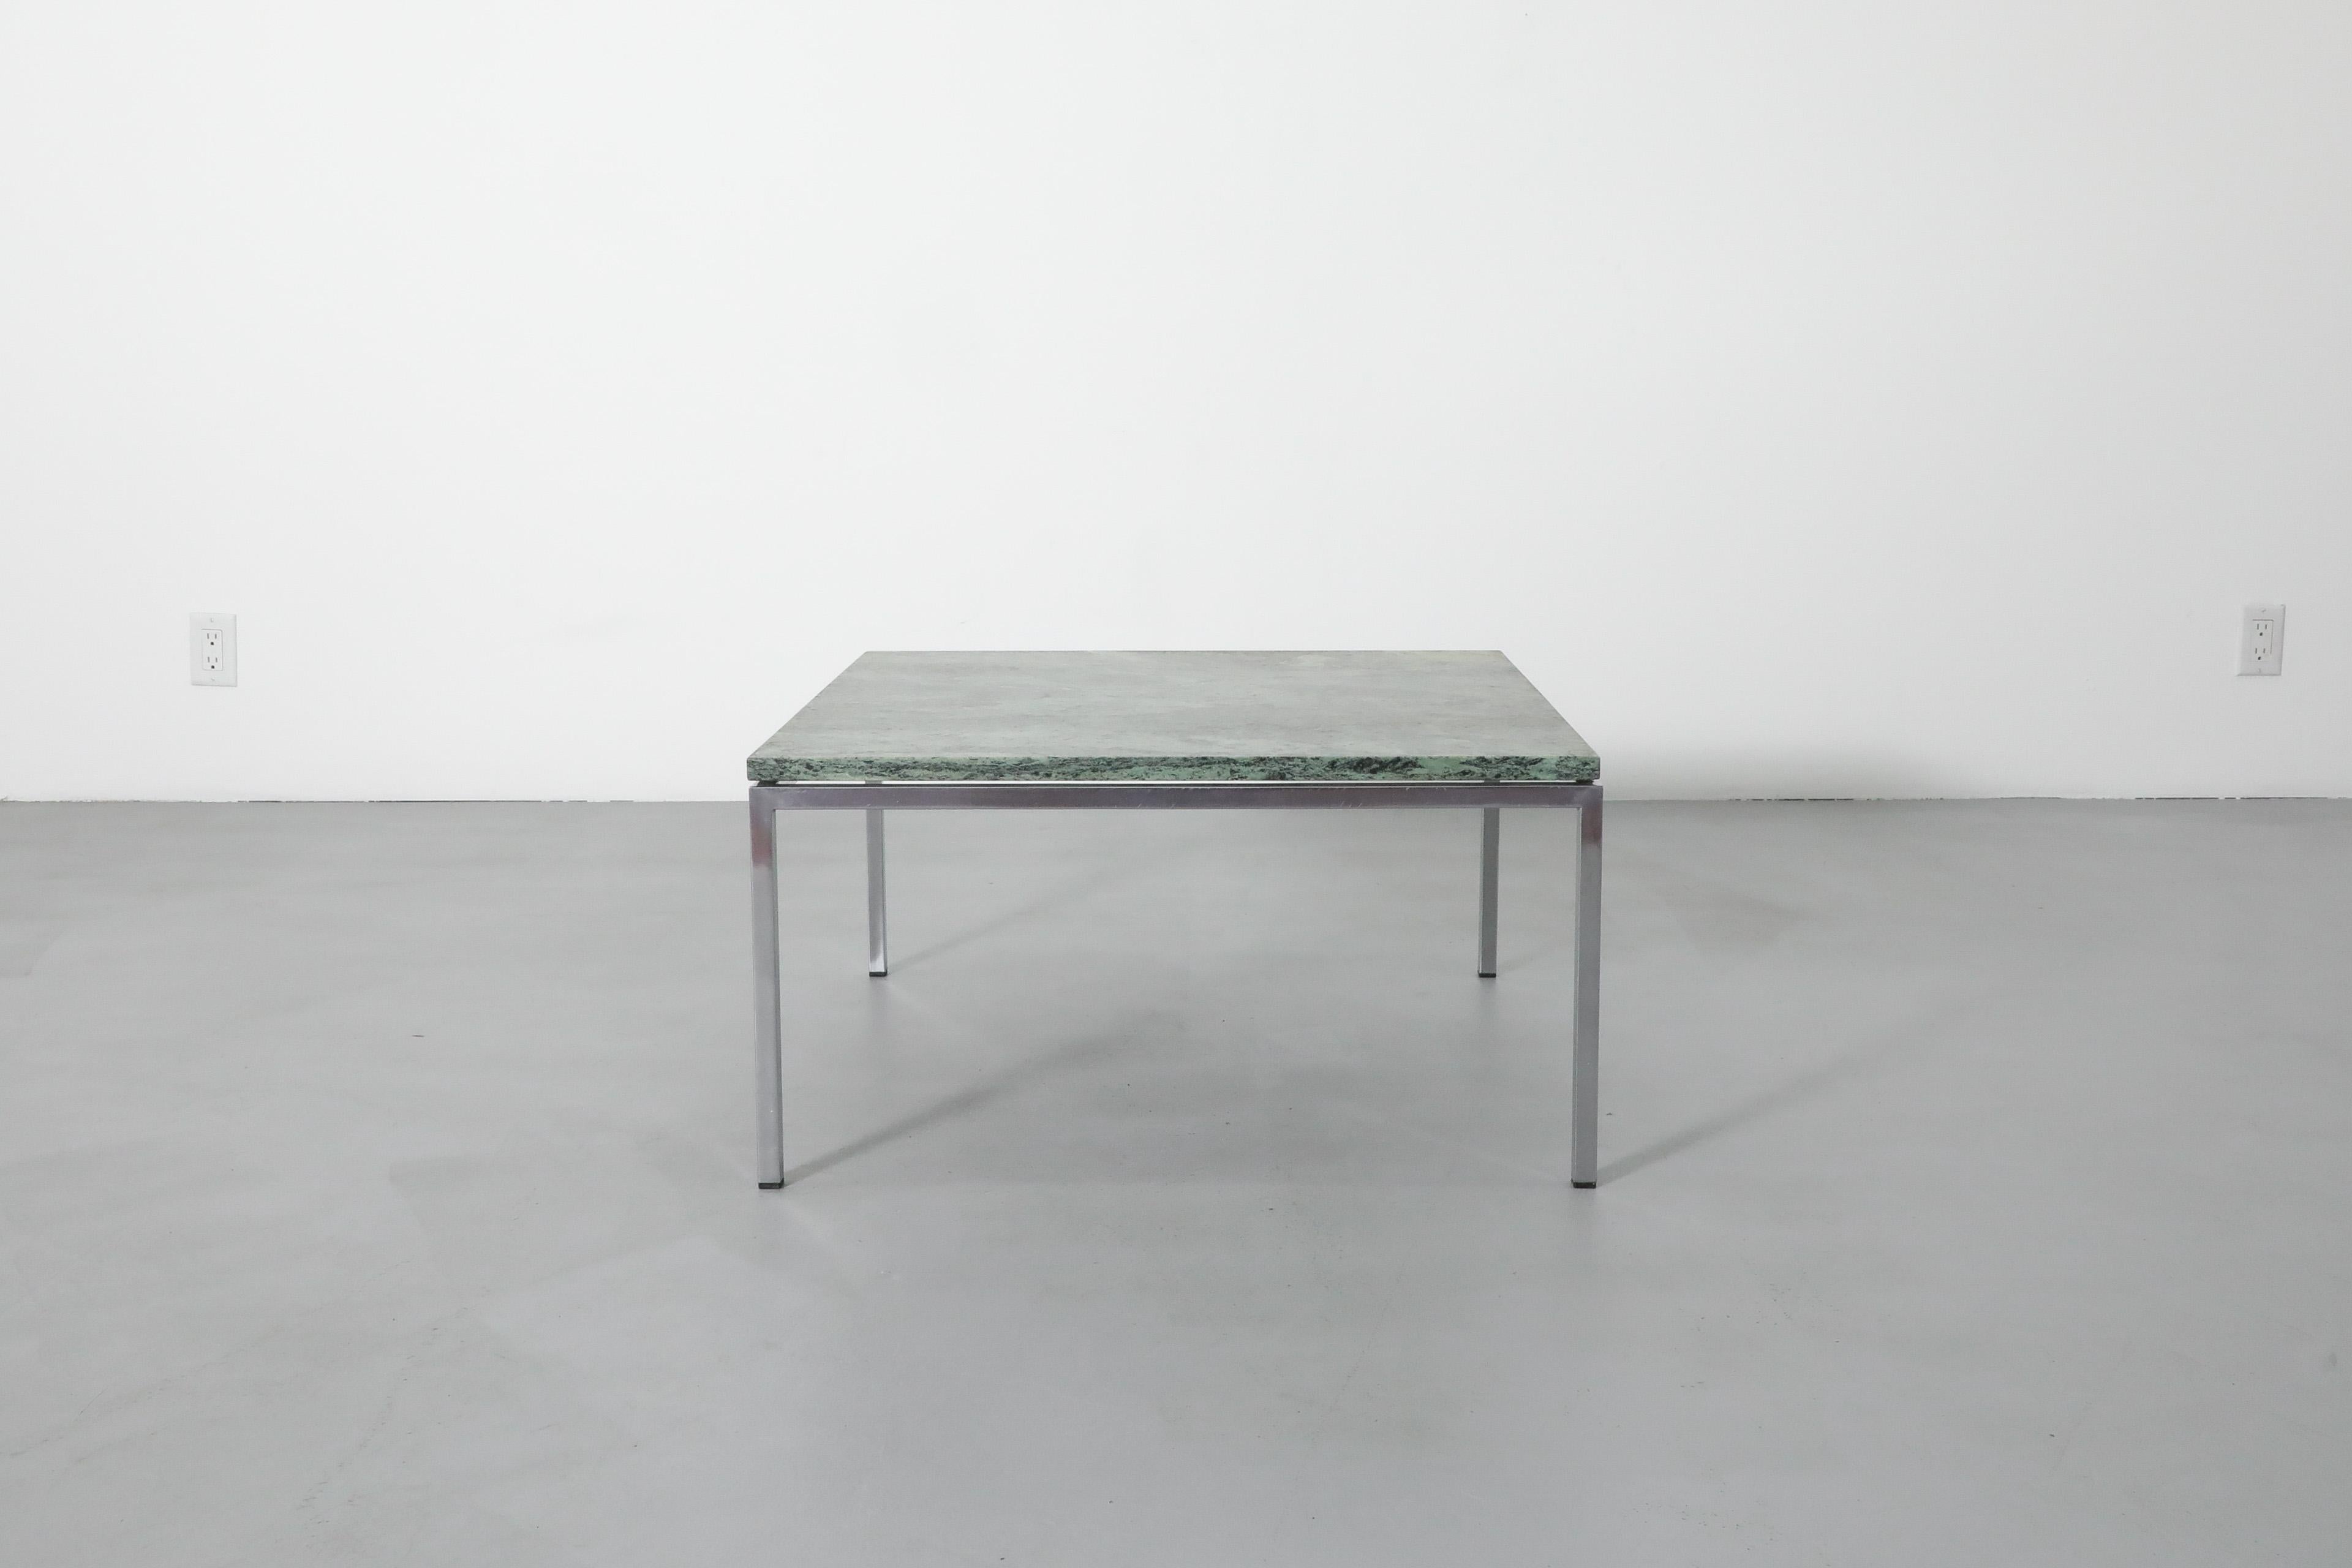 Dutch Mid-Century coffee table with a green marble top on chrome frame. Manufactured by Dutch company Metaform in the 1960's. The beautifully patterned square marble top with rich shades of green and slivers of white makes this an eye catching